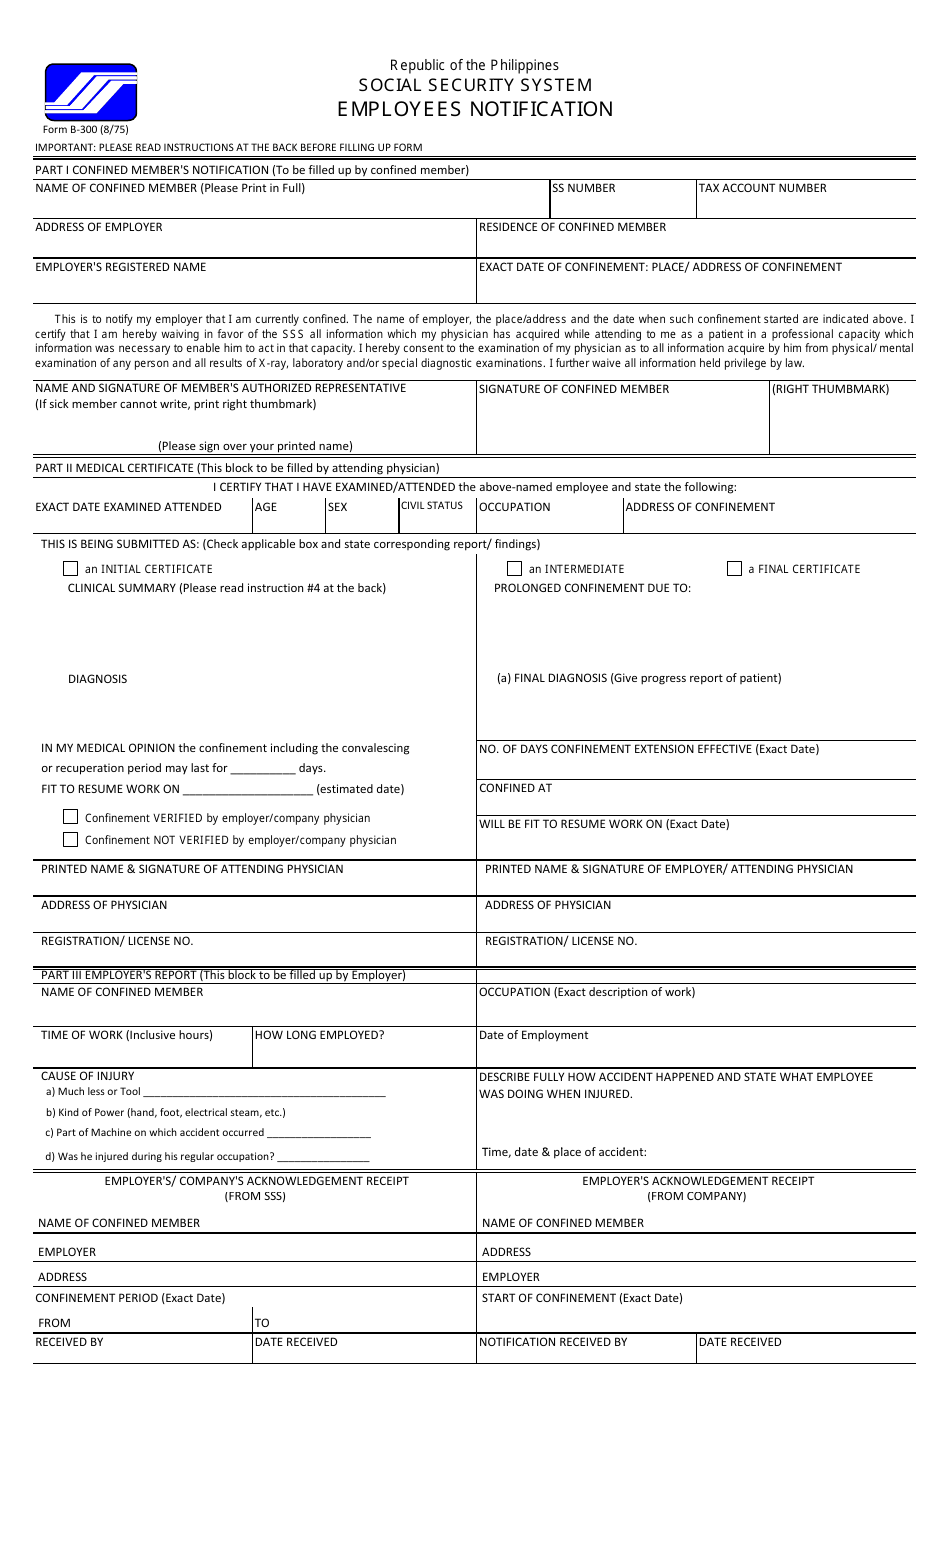 Form B-300 Employees Notification - Philippines, Page 1